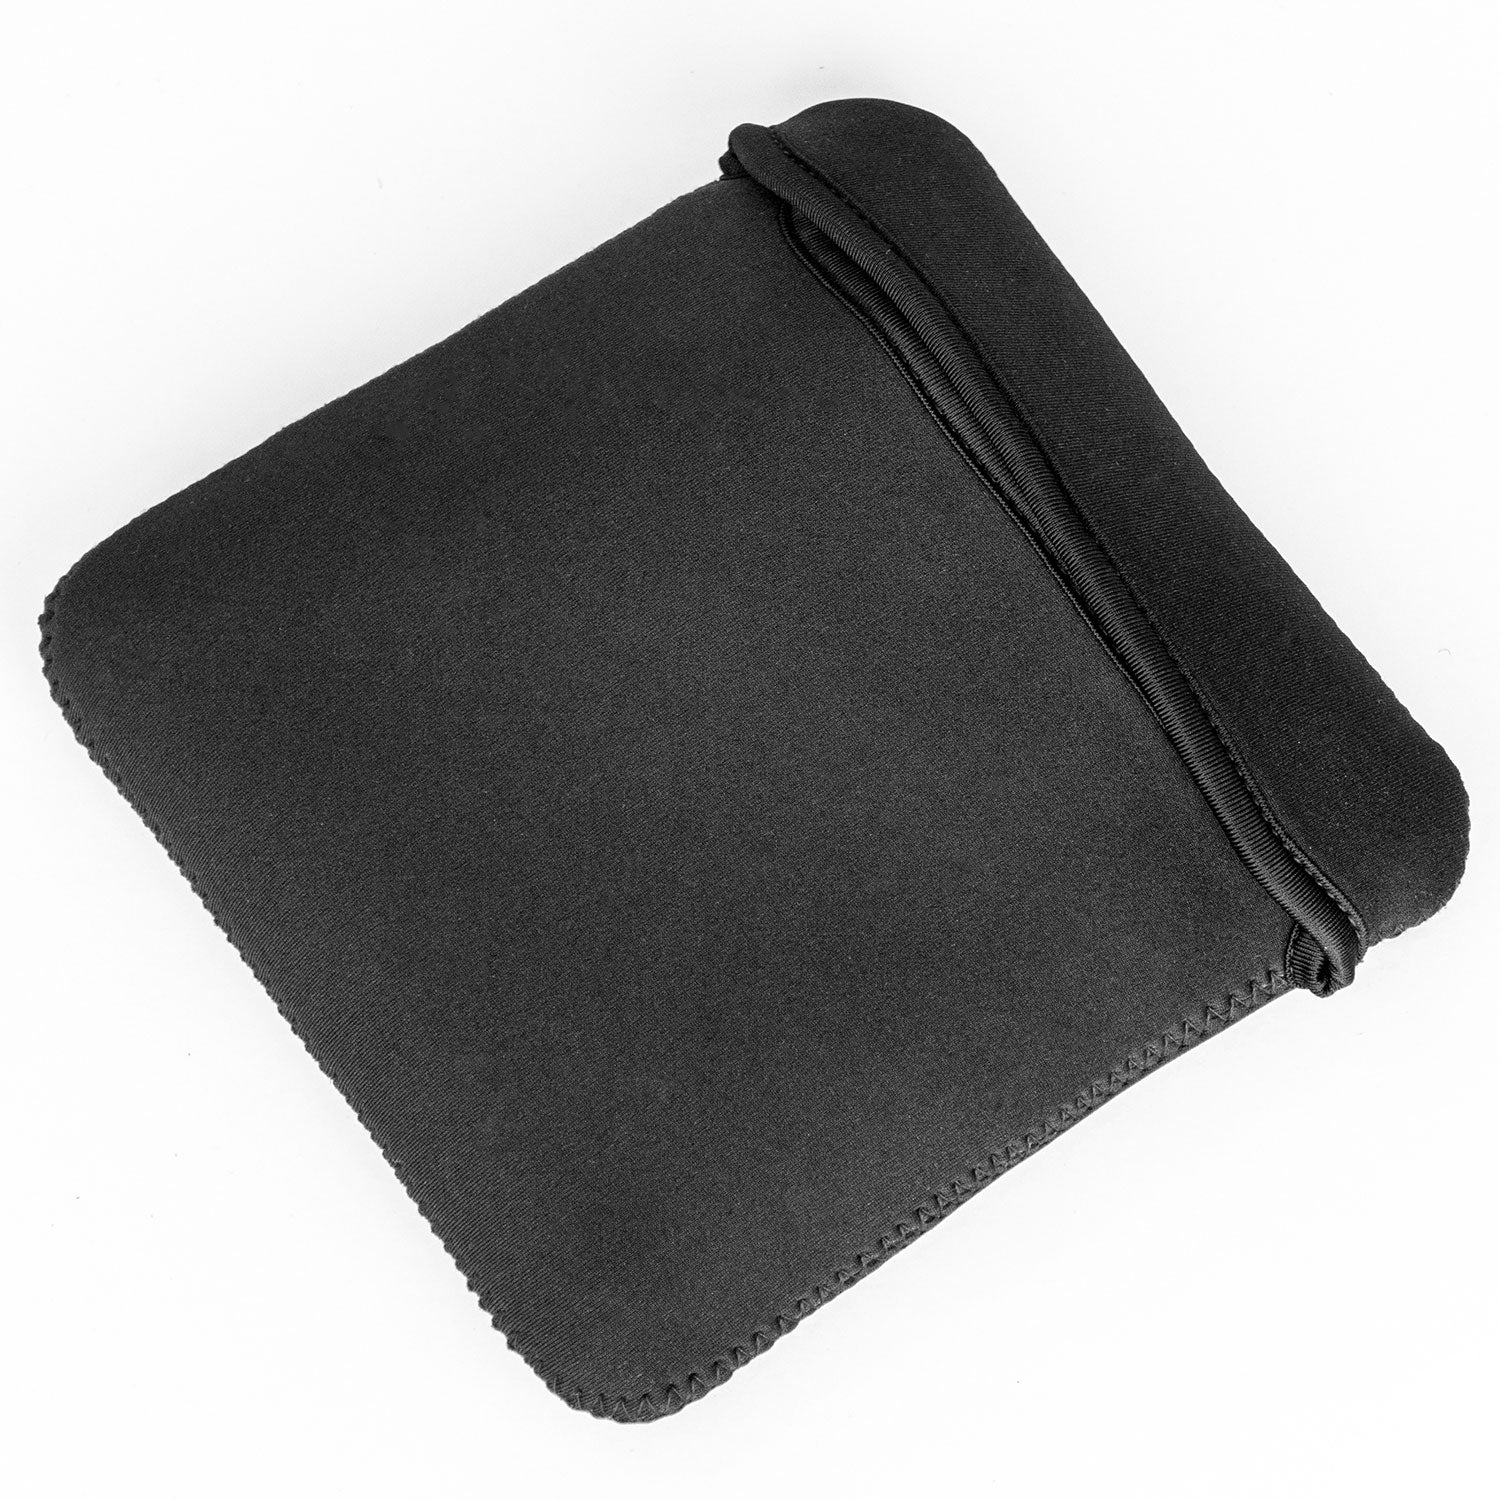 Grifiti Chiton 7 Inch Neoprene Sleeve for Superdrive Hard Drives Trackpads Accessories - Grifiti